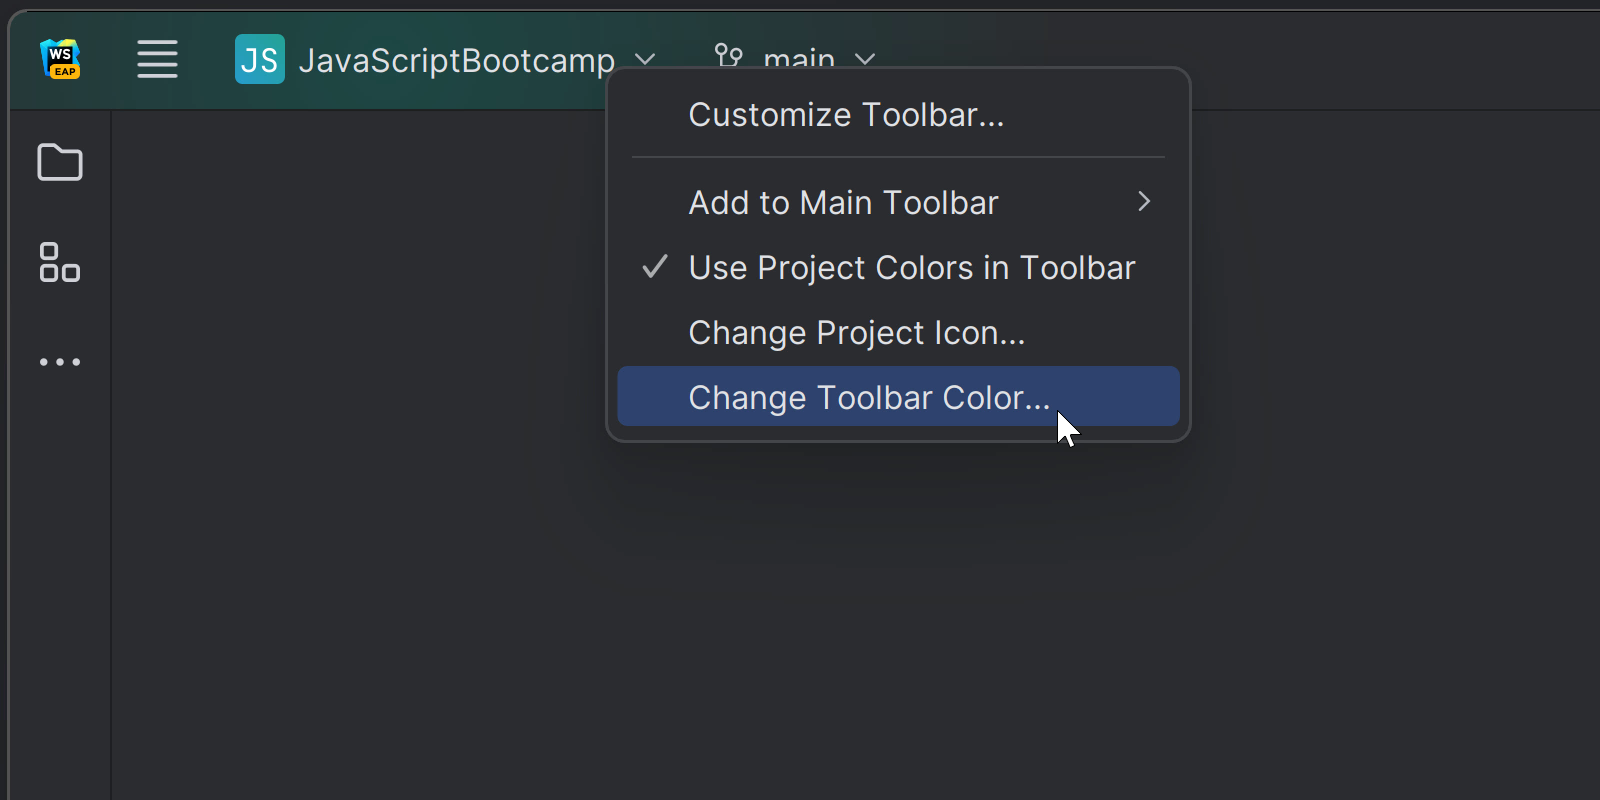 Showing the customizable option for the project color in the header of WebStorm